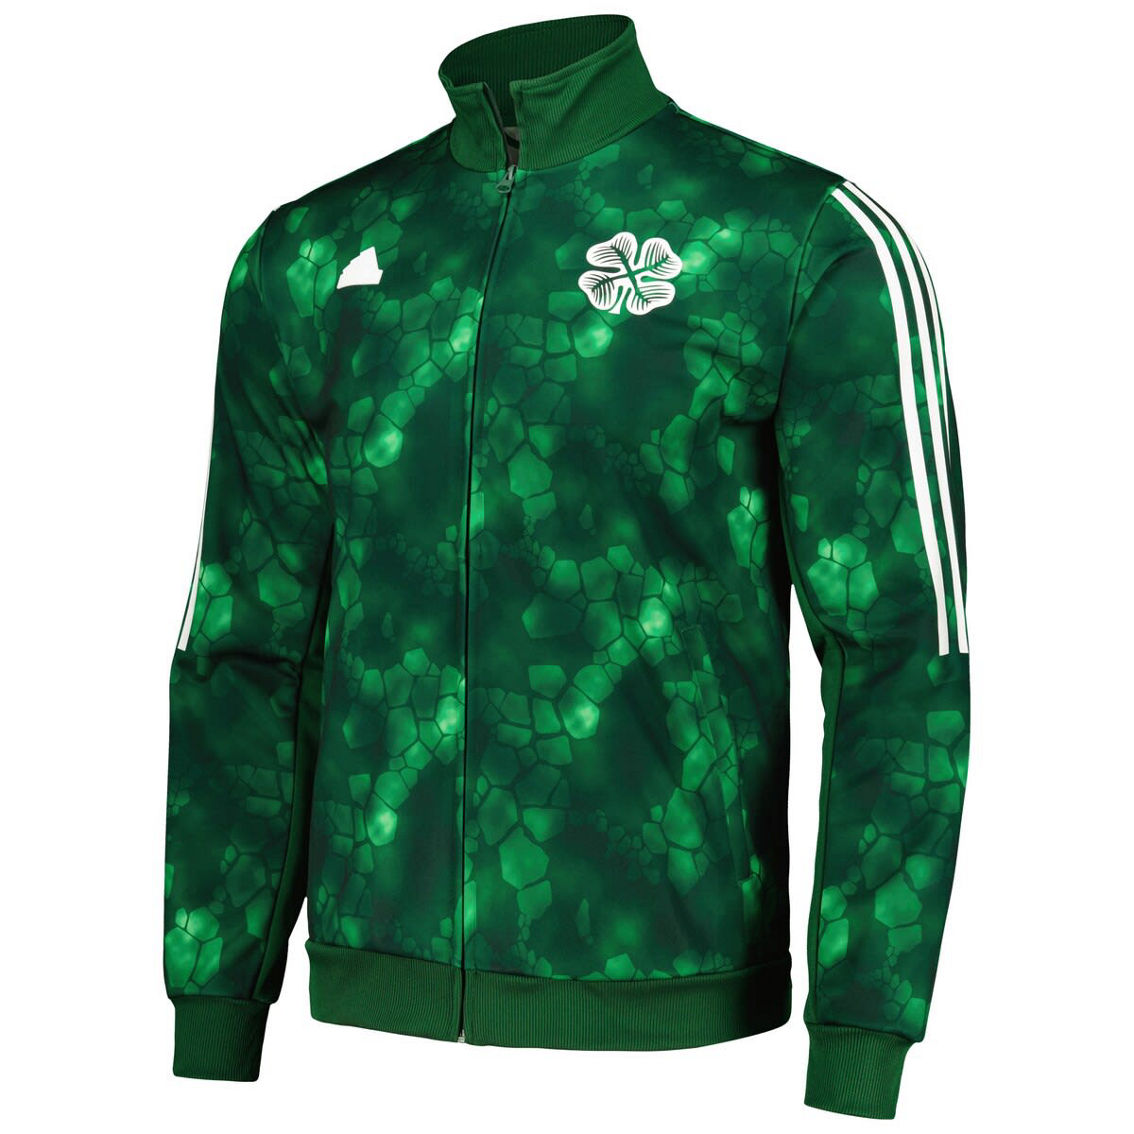 adidas Men's Green Celtic Lifestyle Full-Zip Track Top - Image 3 of 4